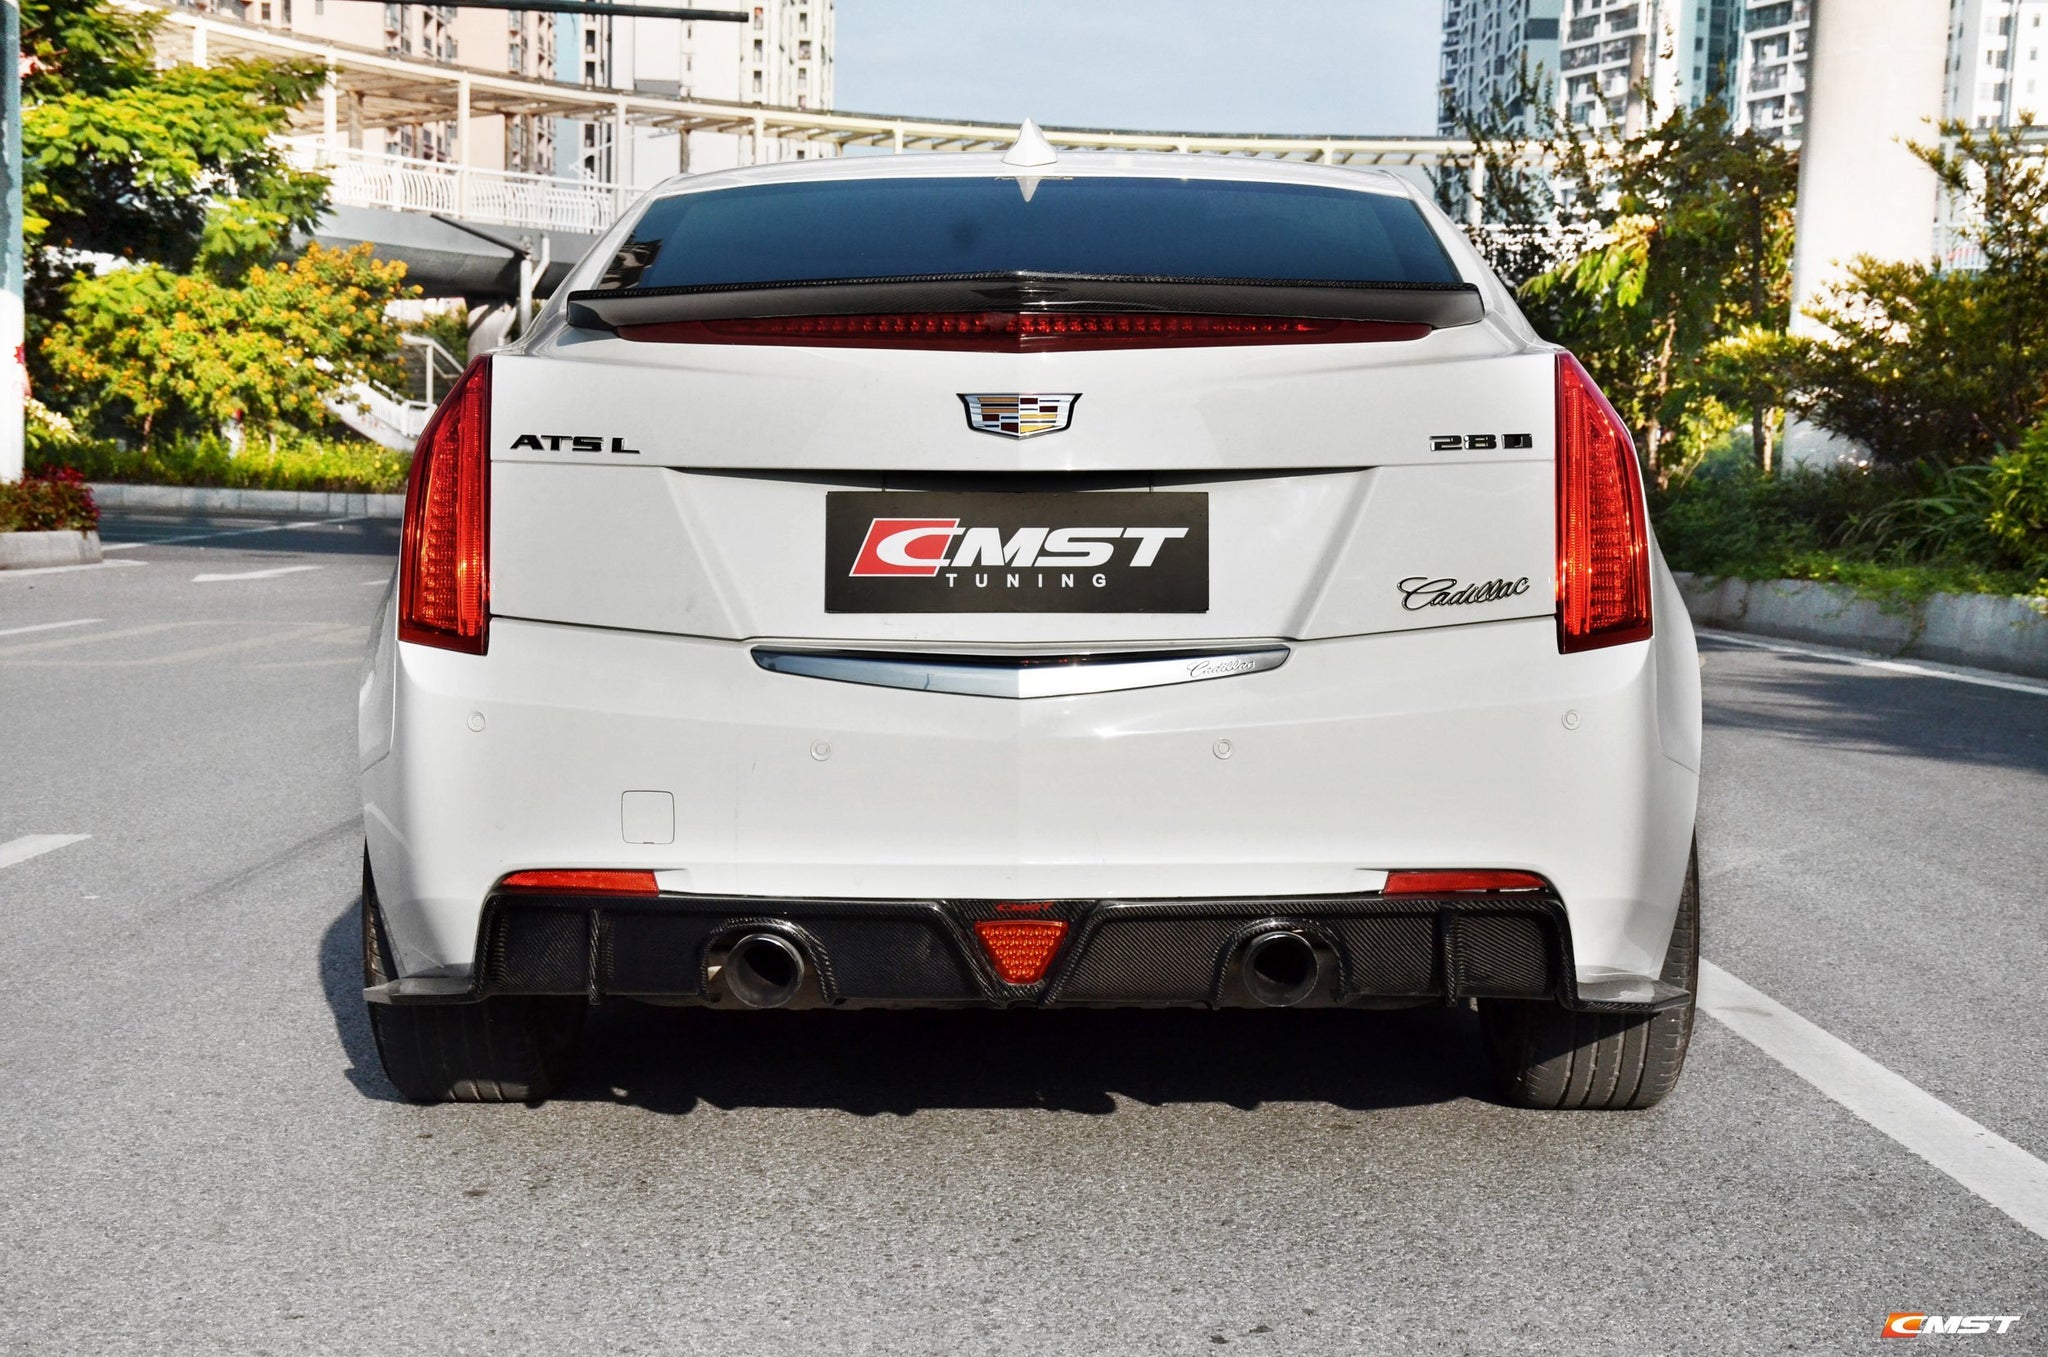 Check our price and buy CMST Carbon Fiber Body Kit set for Cadillac ATS!